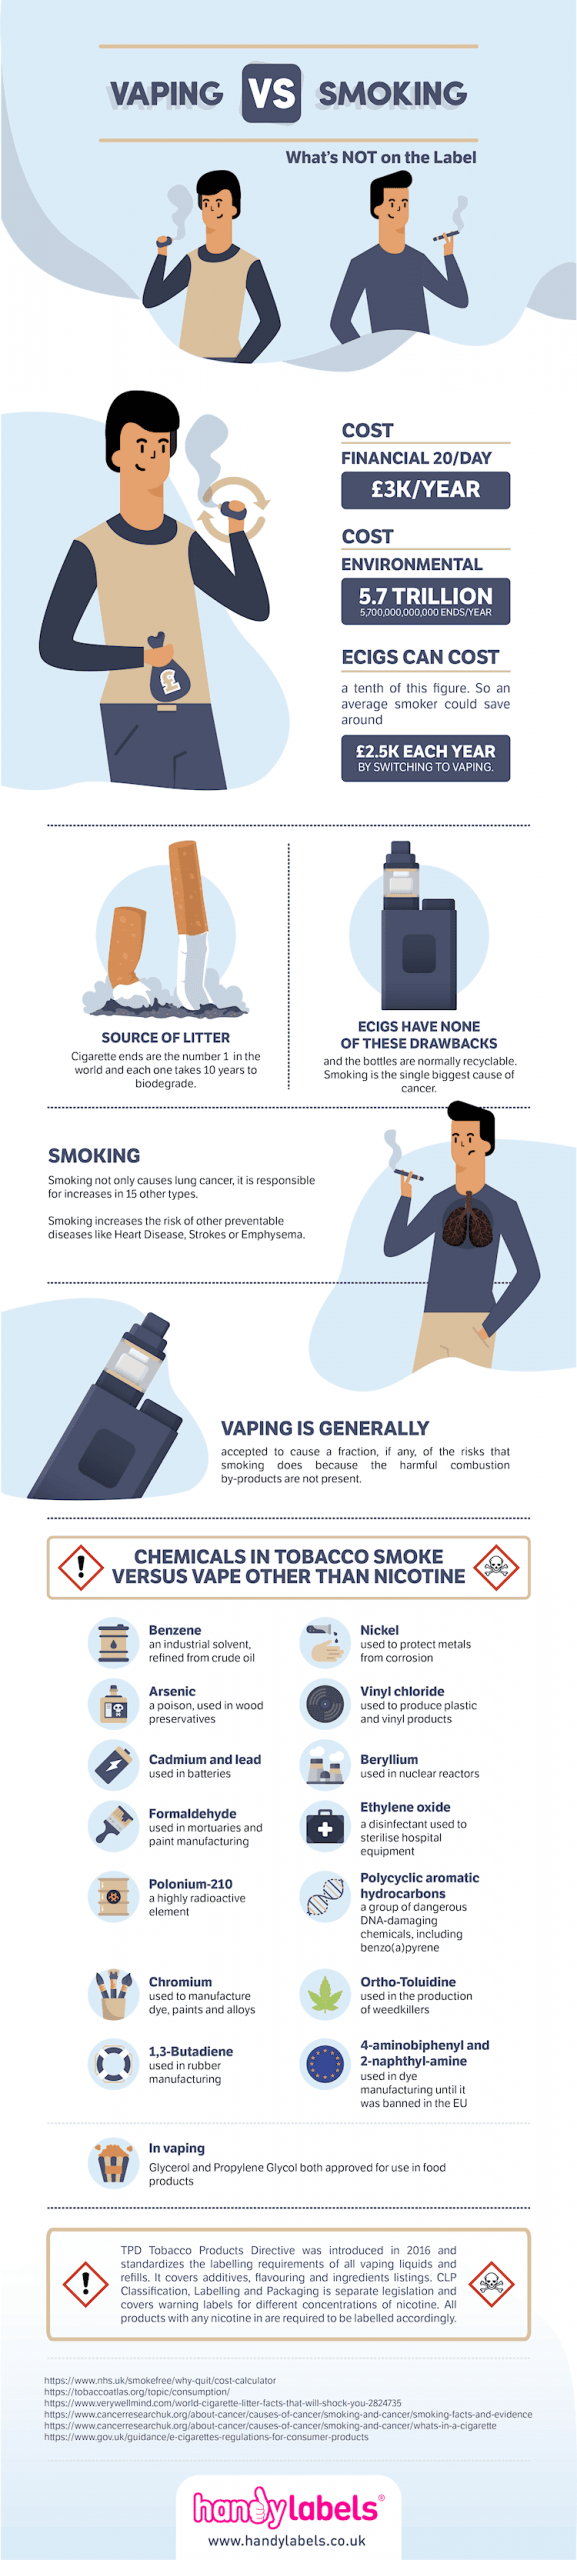 Vaping vs Smoking and its Implications for Product Labelling